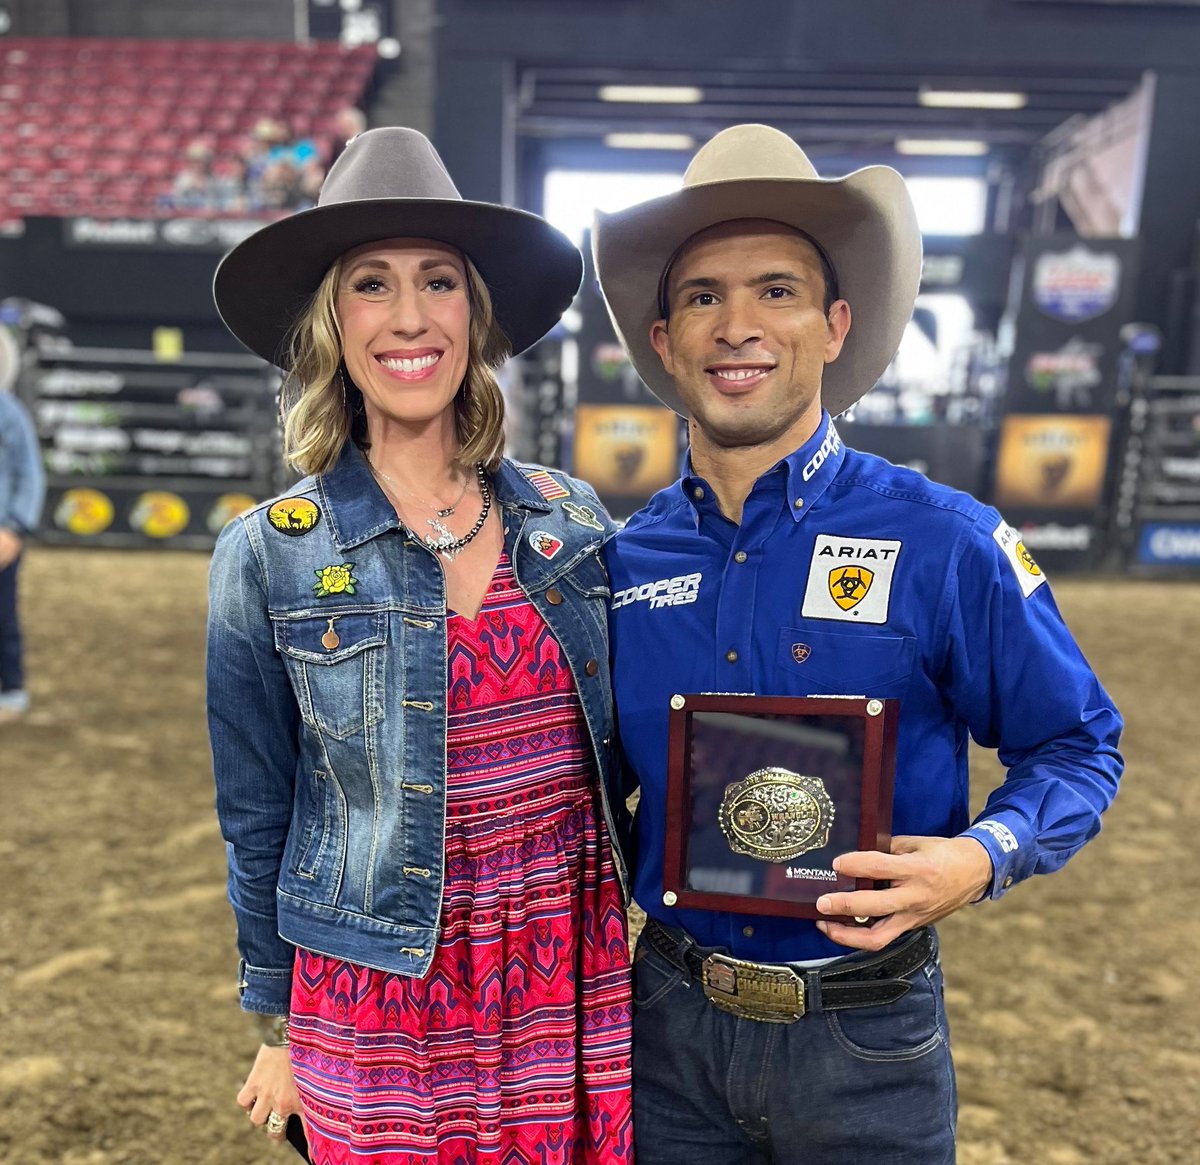 Lookout, the PBR is in Montana! Congratulations, to Eduardo Aparecido who took home the Montana Silversmiths buckle from this weekend's PBR event in Billings Montana. #MontanaSilversmiths #PBR #BrandofChampions #Everybucklehasastory #Montana